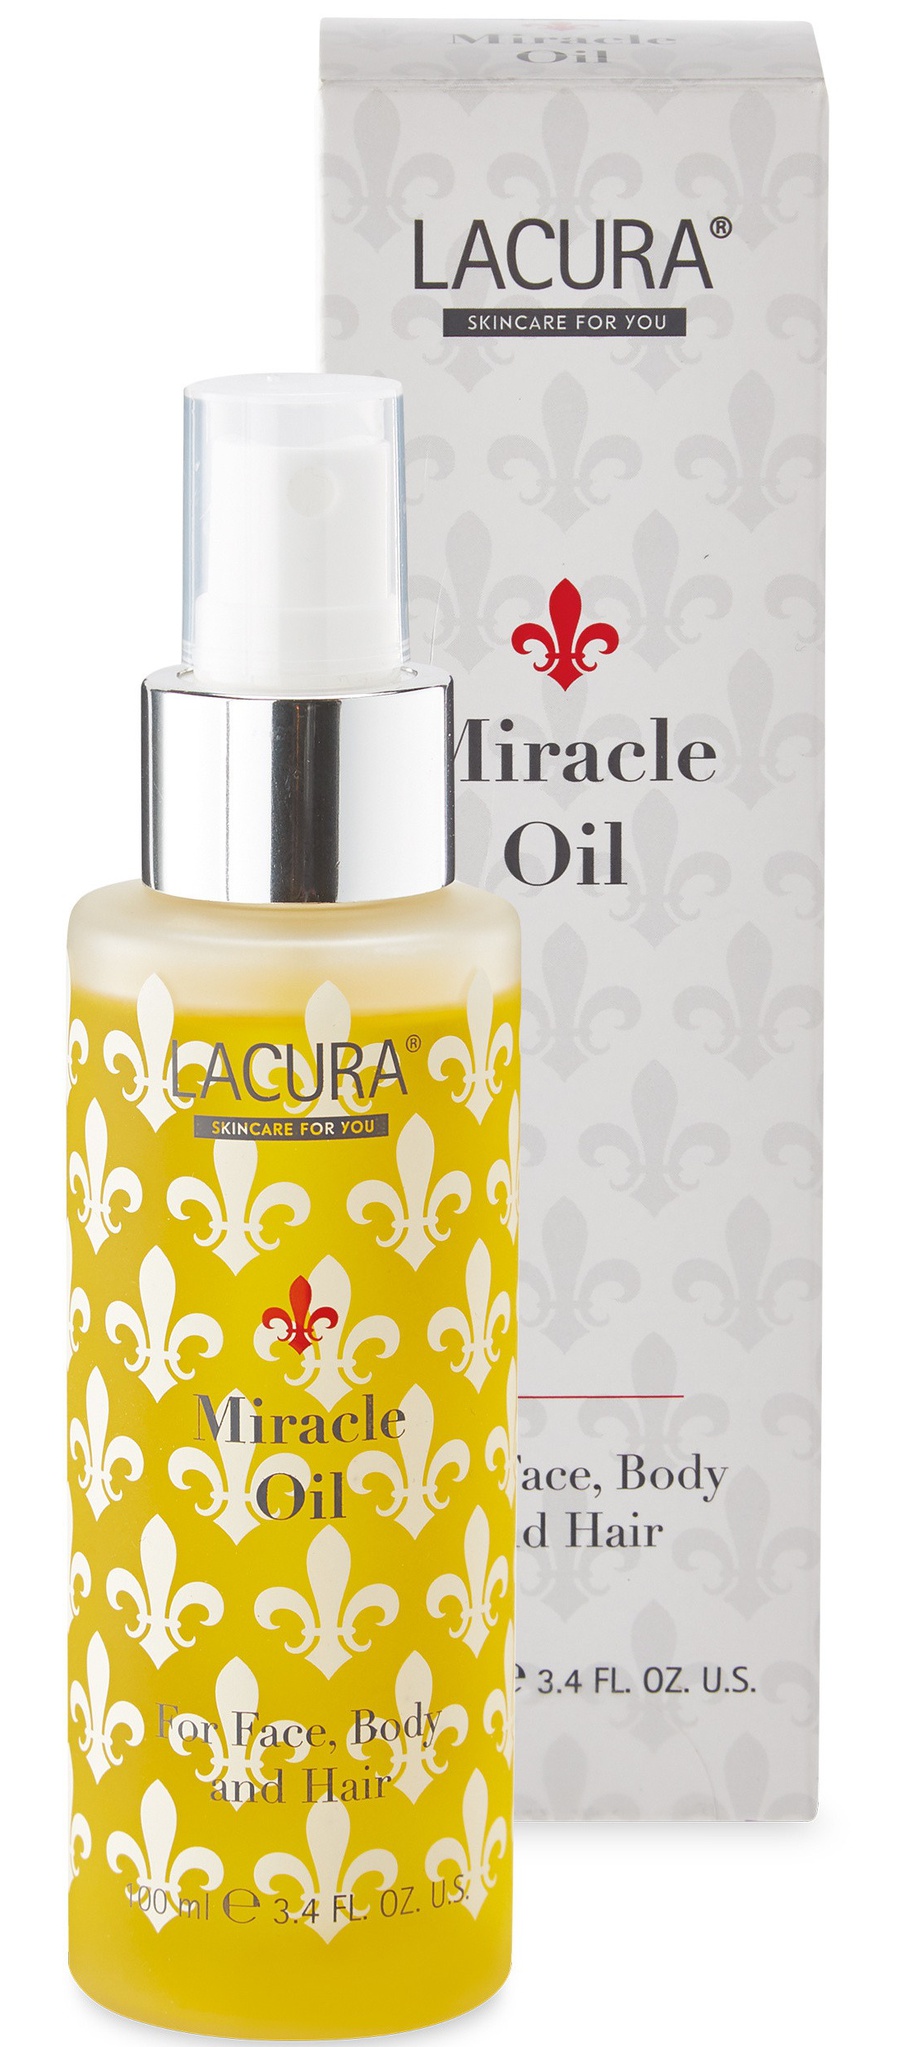 LACURA Miracle Oil